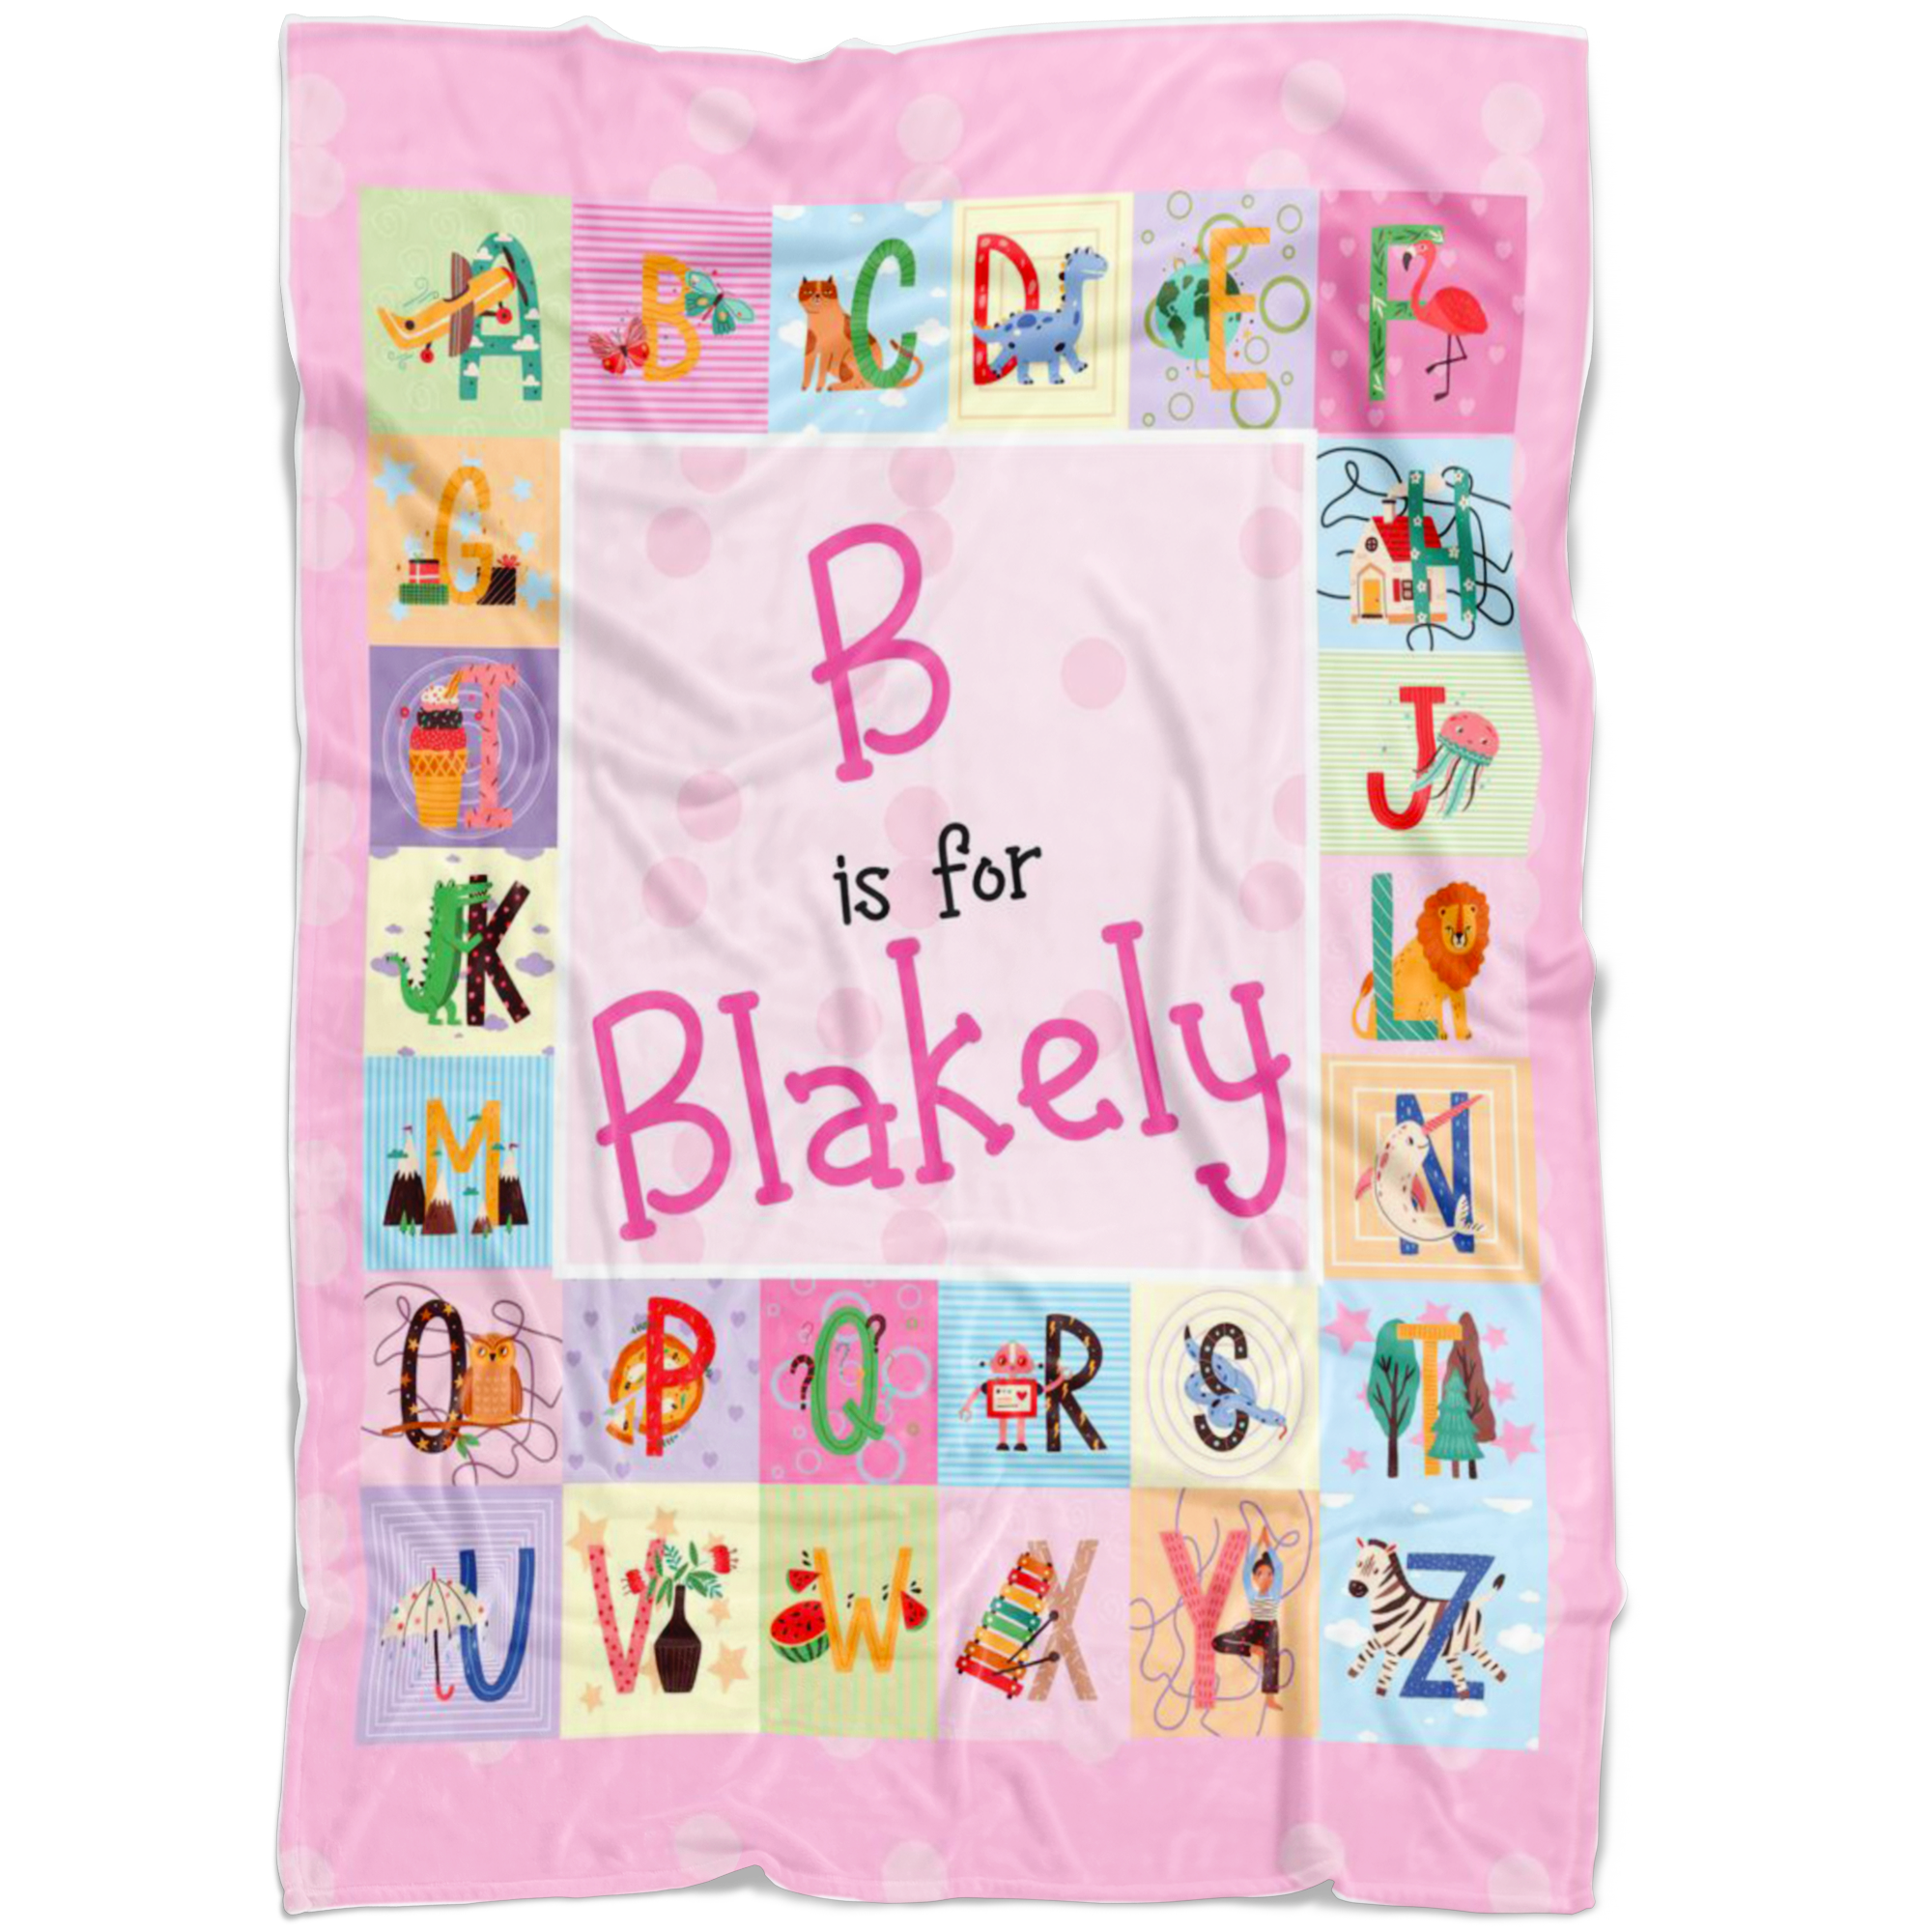 Personalized Name ABC Blanket for Babies & Girls - Blakely